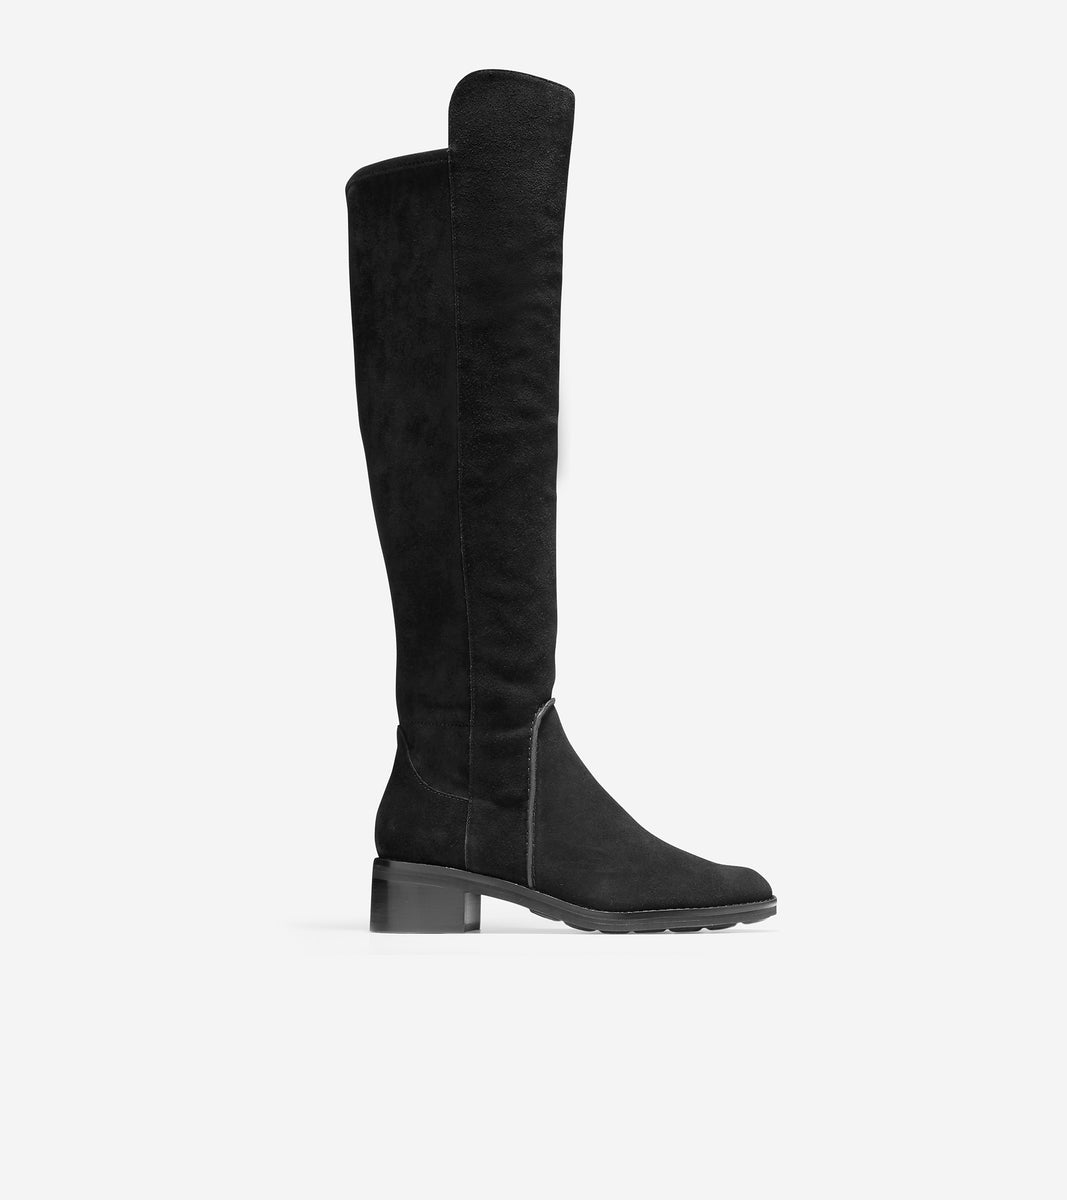 ColeHaan-Calgary Over-The-Knee Boot-w24672-Wr Black Suede